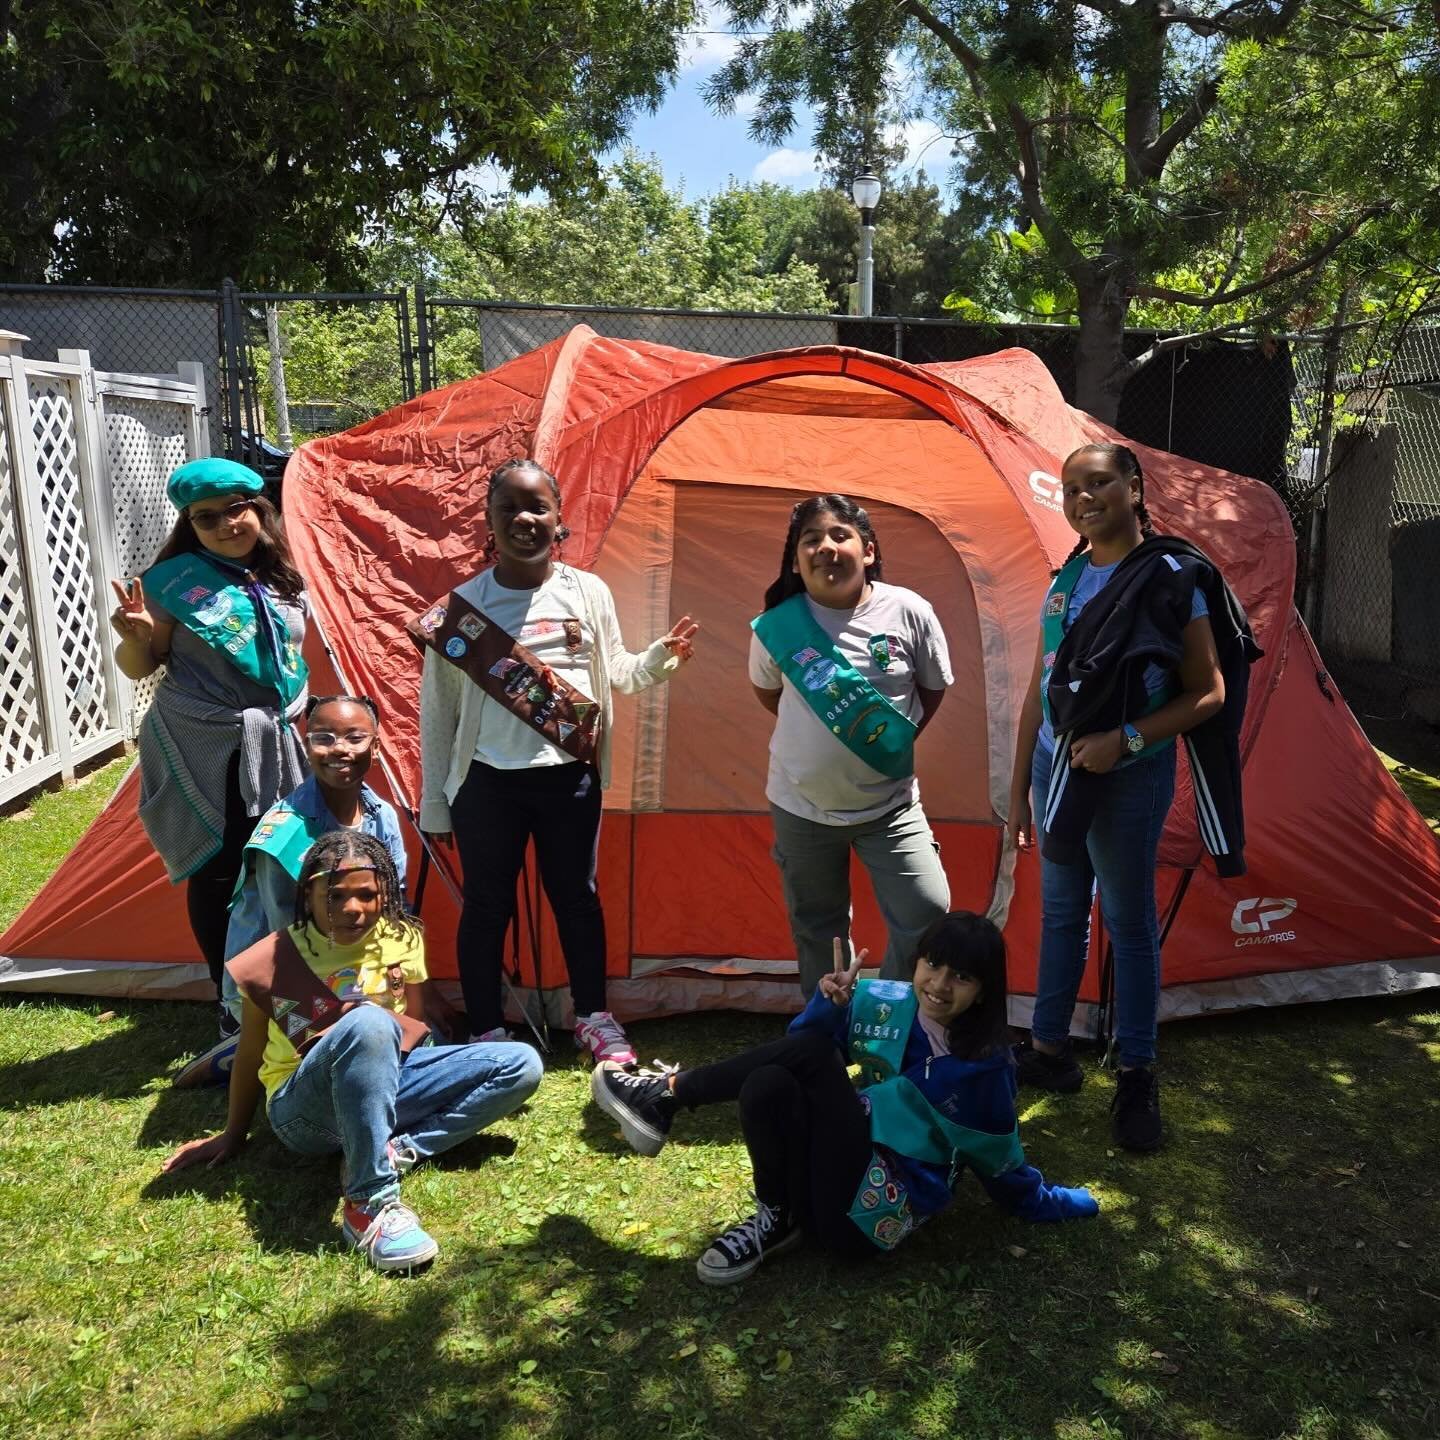 Last weekend our G.IRL Scout Troop went on their first overnight camping trip at the Girl Scout house in San Gabriel Mountains.
&zwnj;
☘️👧🏿👩🏾&zwj;🦱👧🏽☘️
&zwnj;
Our girls had to pitch their own tents, cook their own food, practiced their knife s